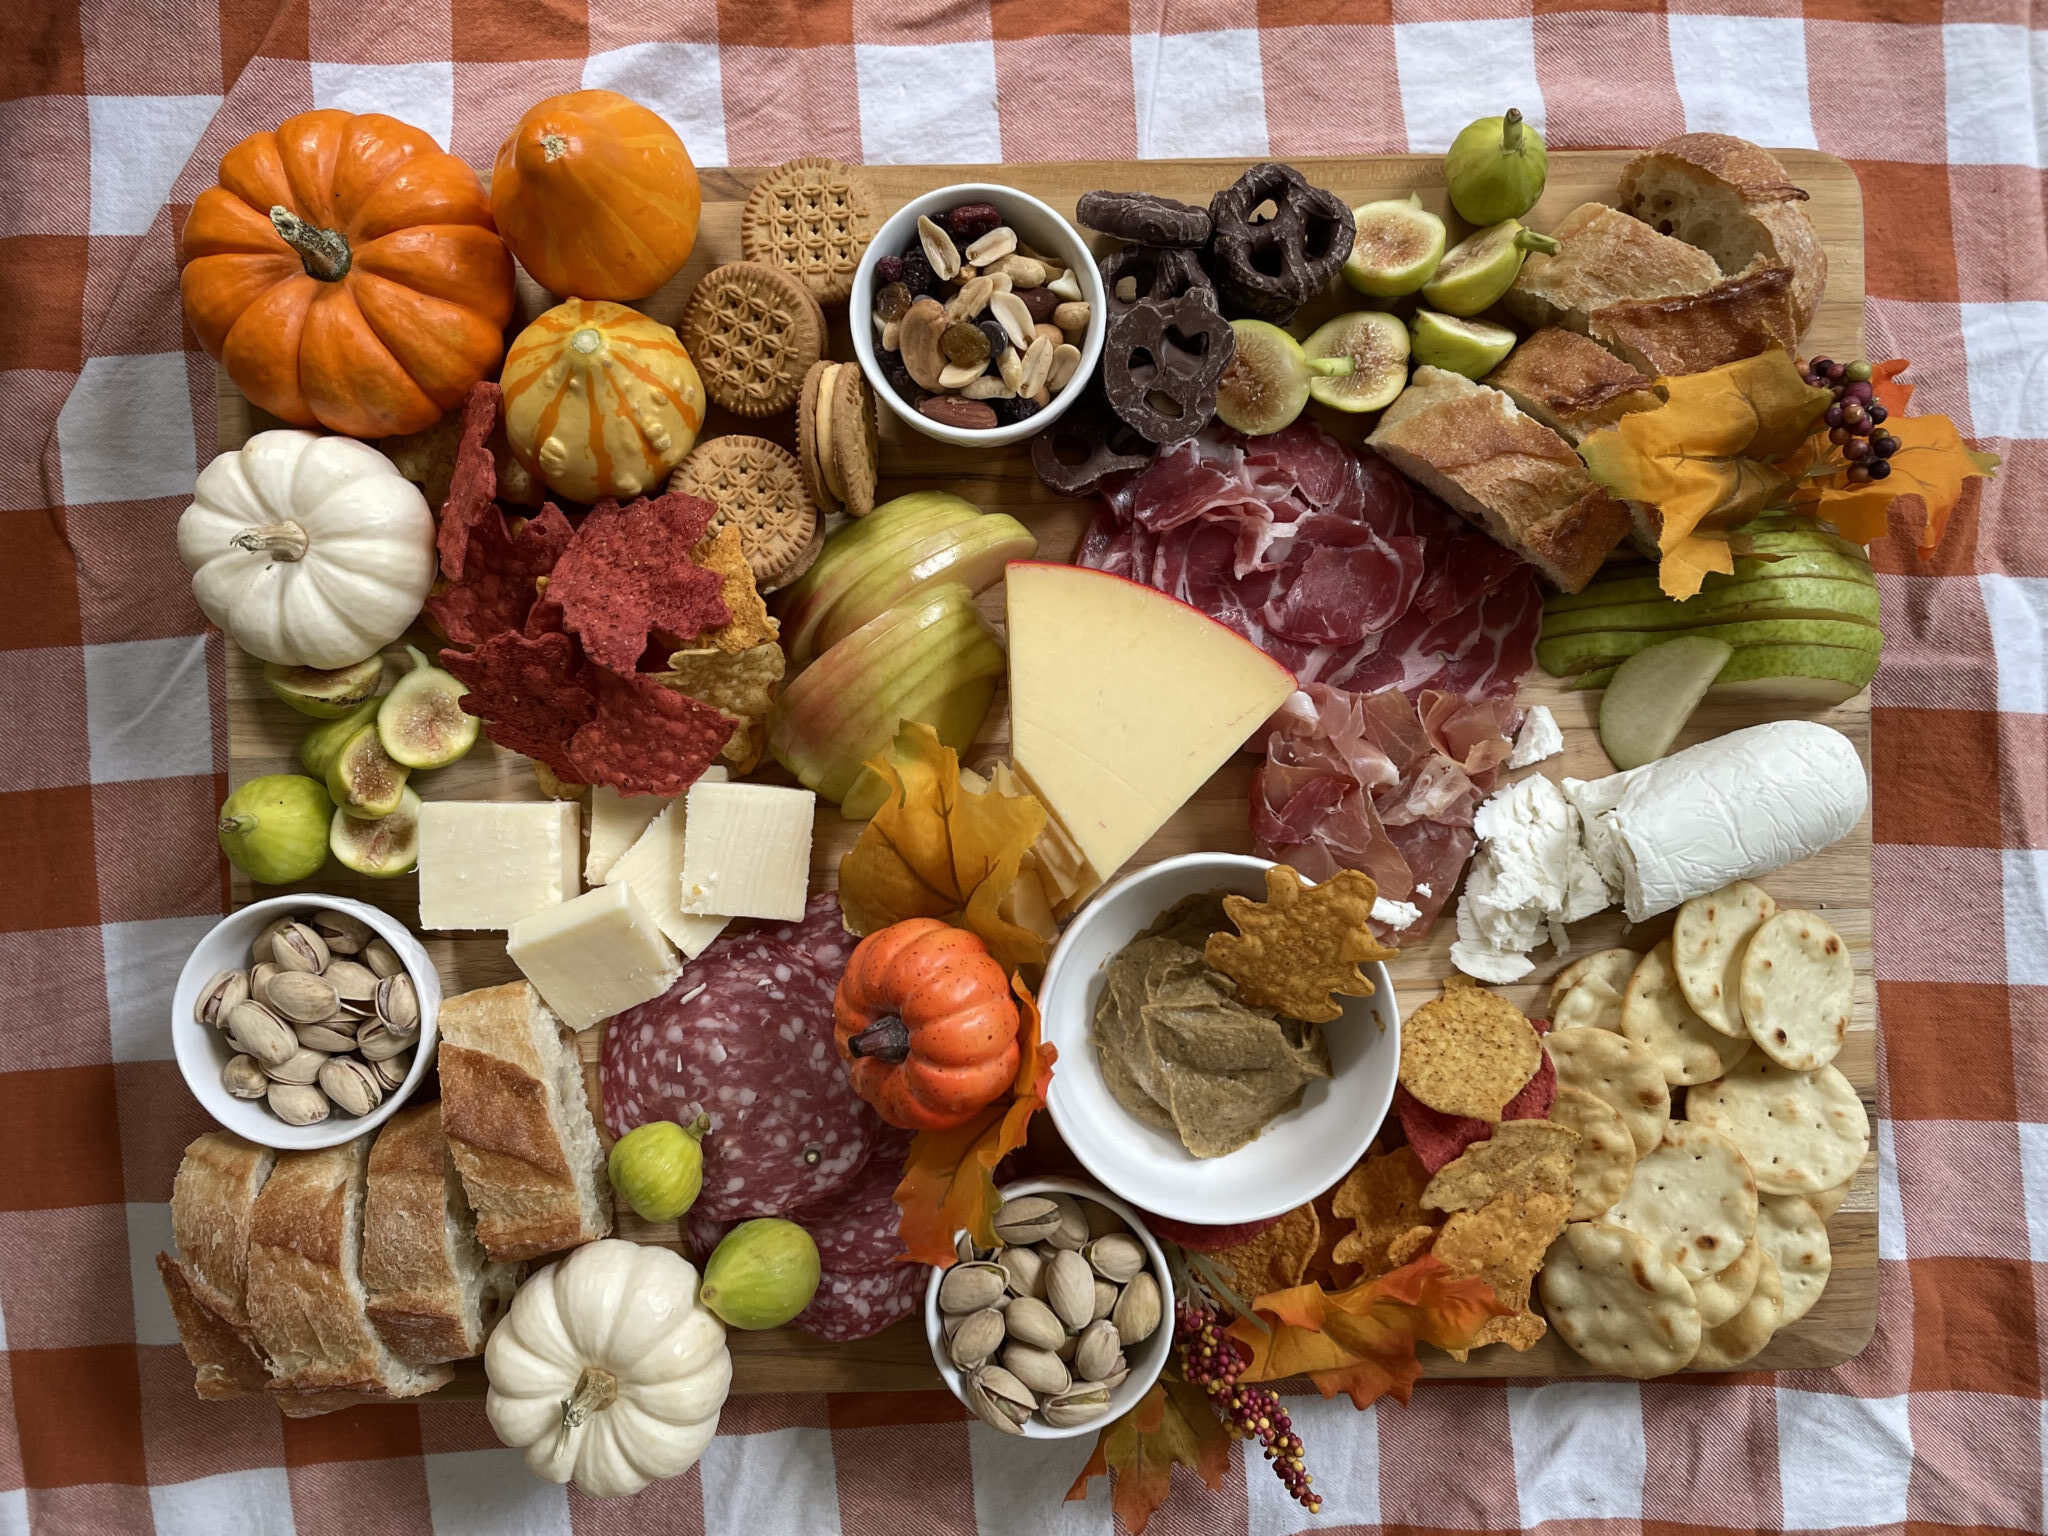 How to Make the Perfect Fall Charcuterie Board